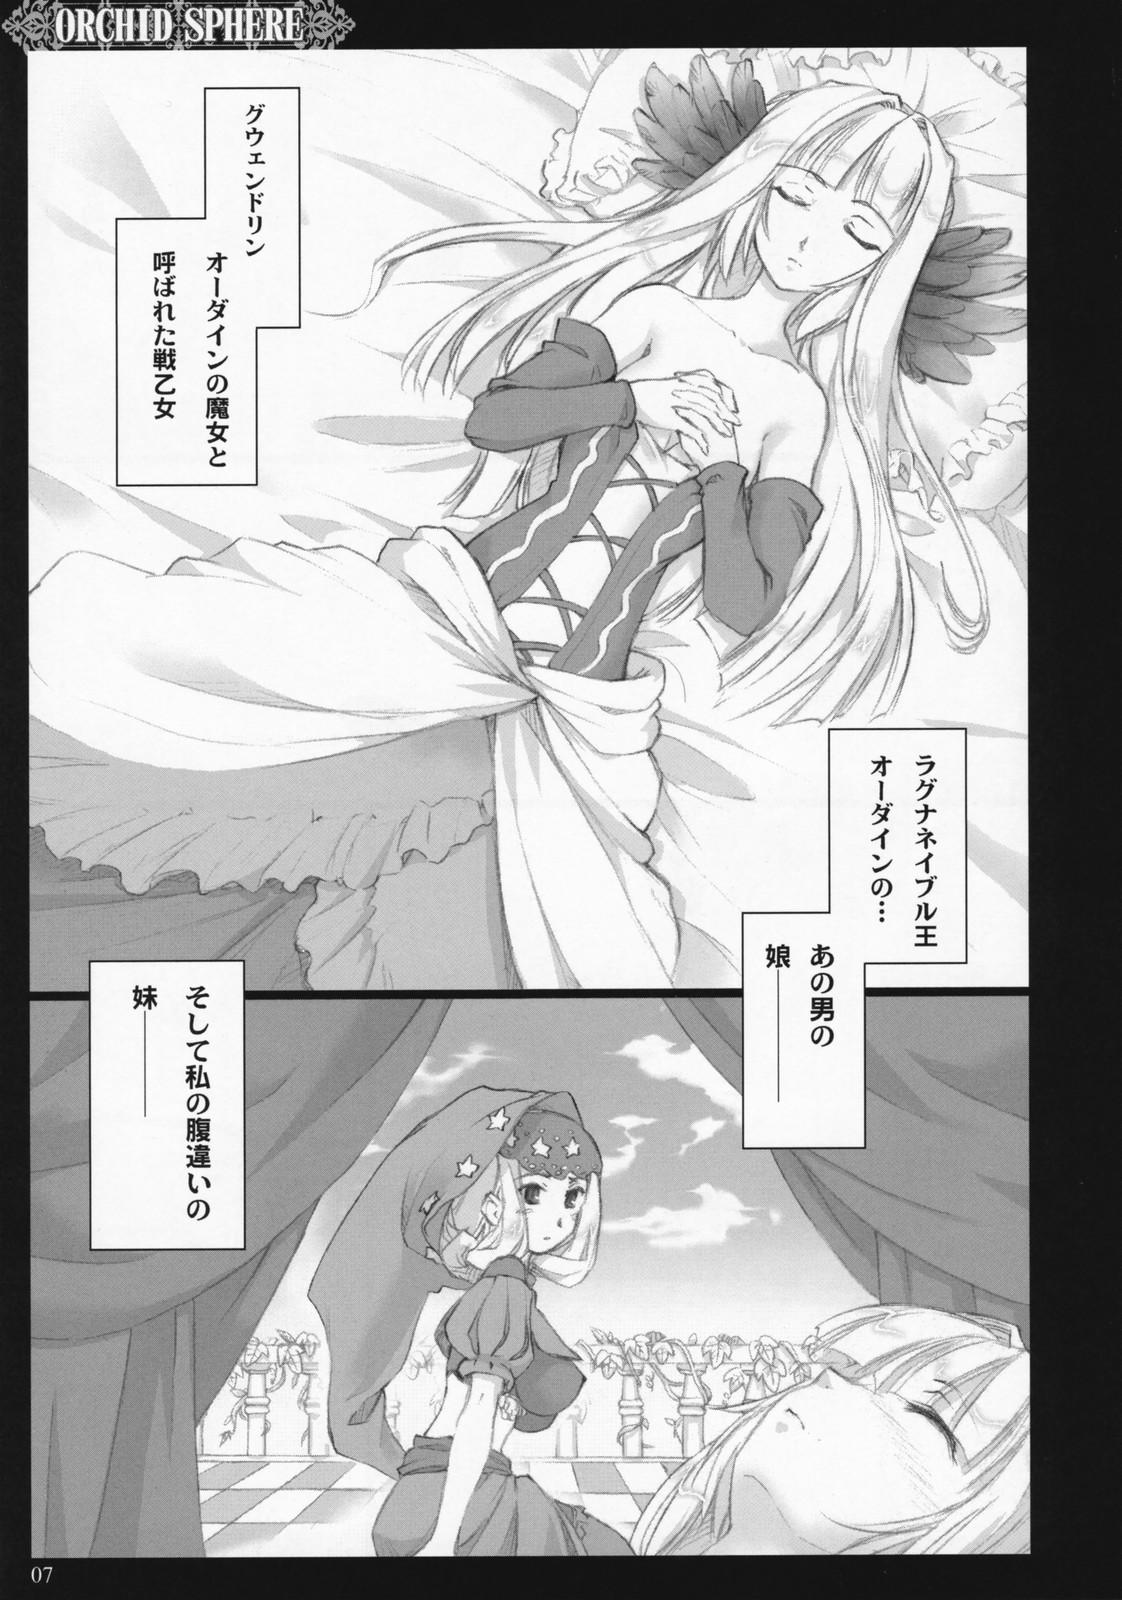 Girl Sucking Dick Orchid Sphere - Odin sphere Woman Fucking - Page 6